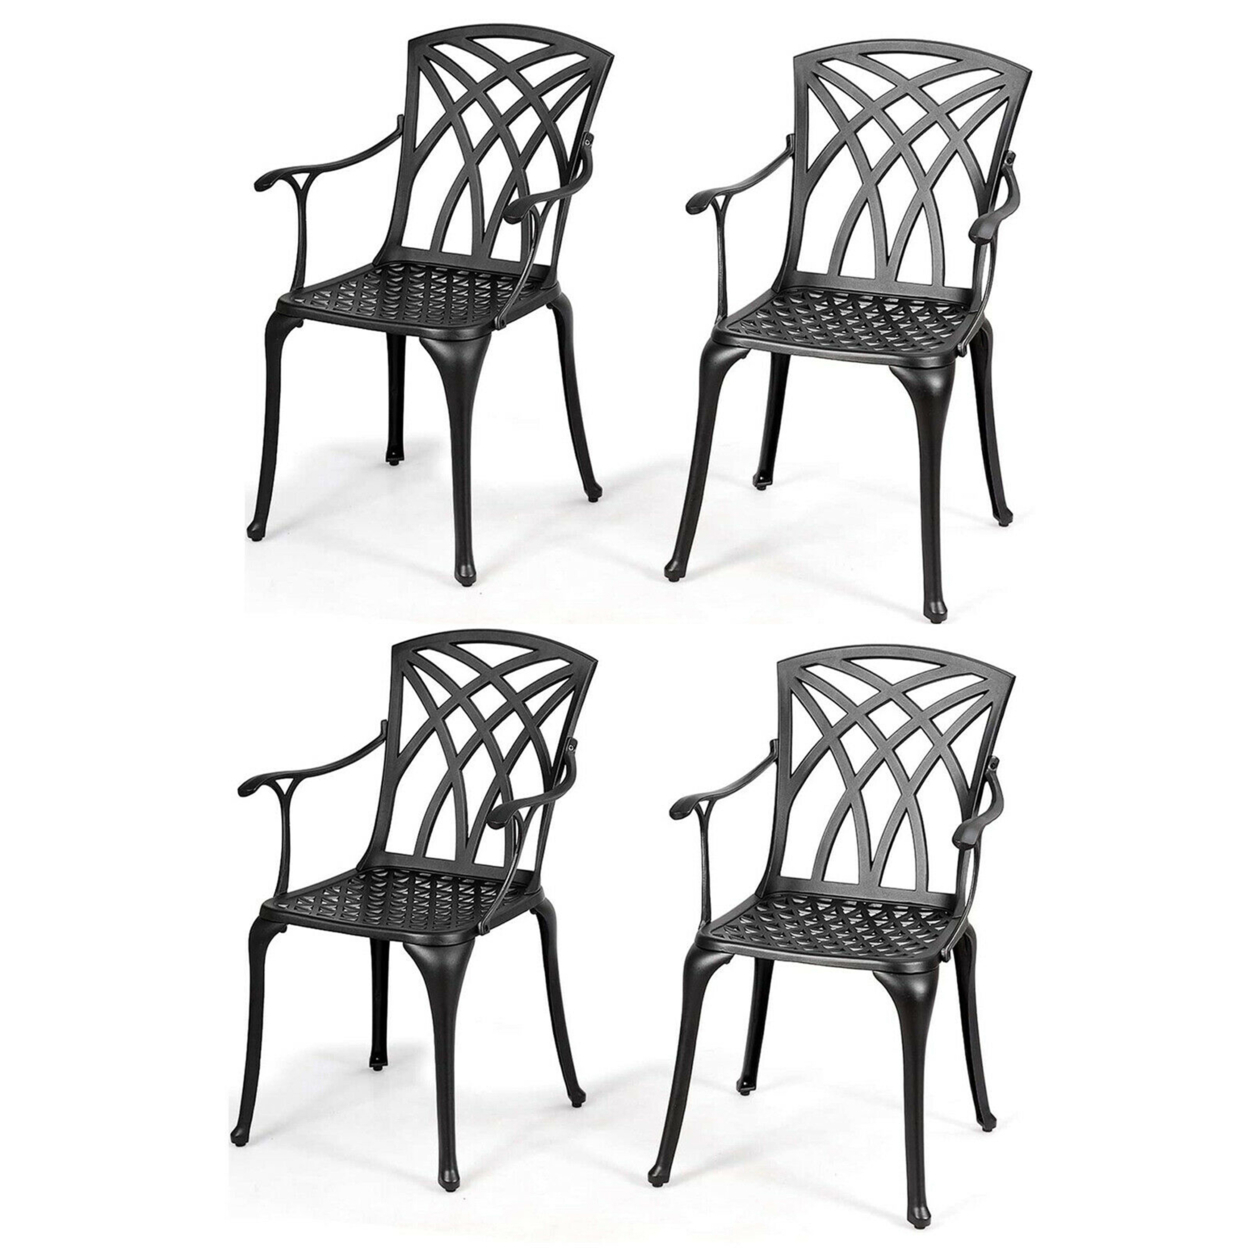 Set Of 4 Cast Aluminum Dining Chairs Durable Solid Construction W/Armrest Black